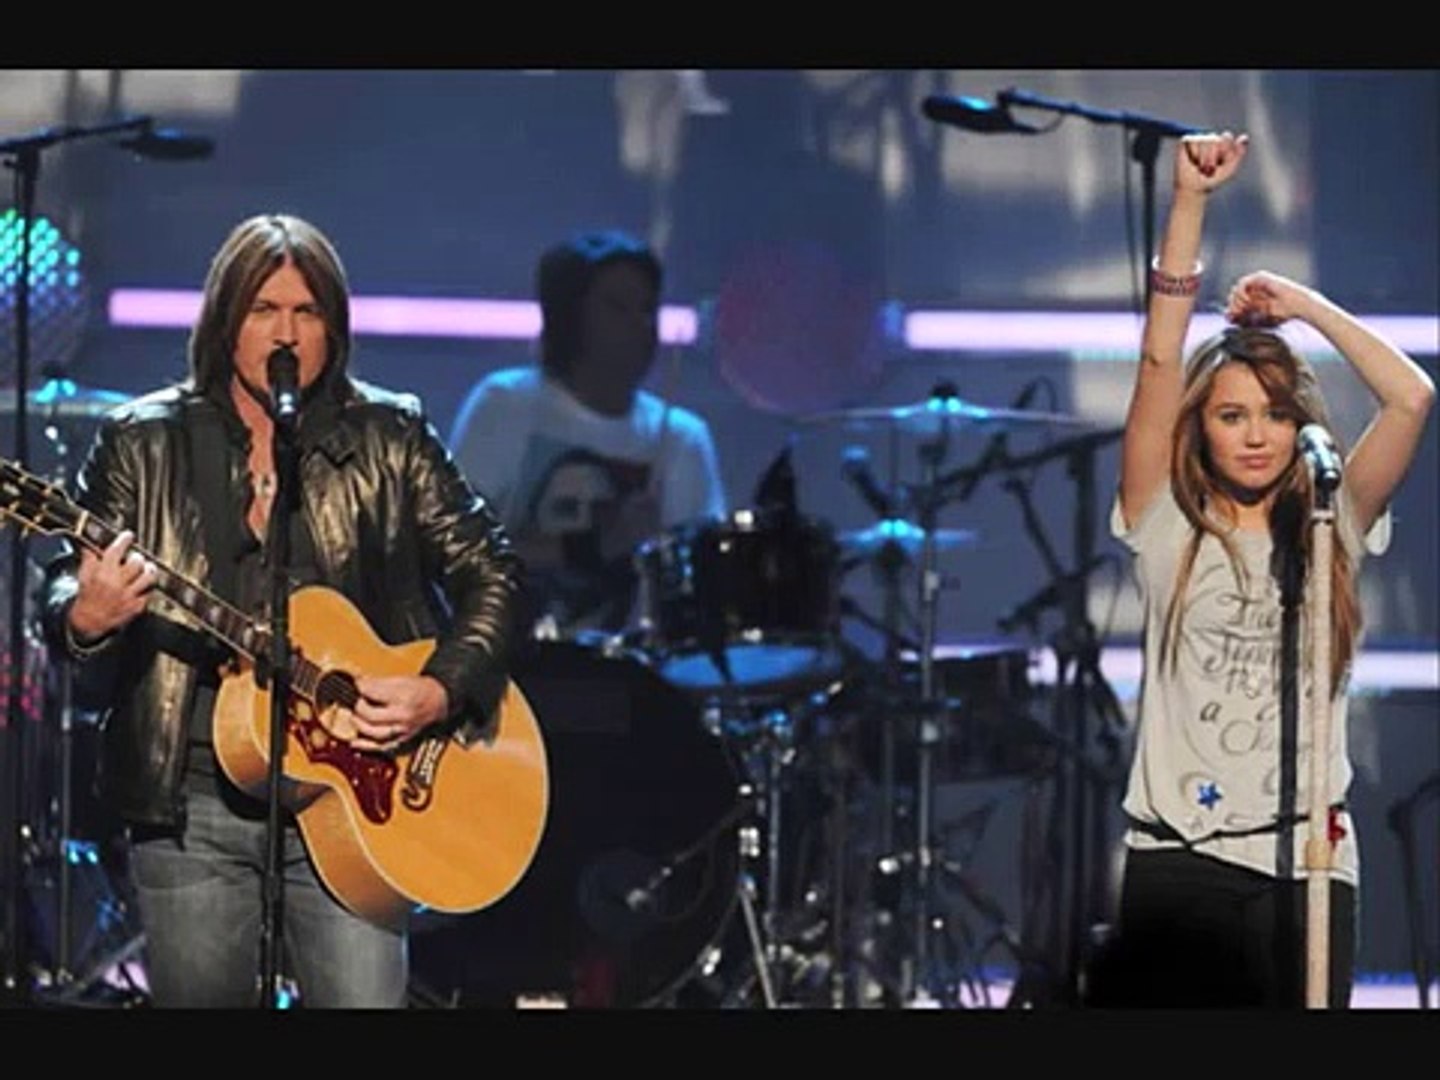 Billy ray cyrus & miley cyrus - achy breaky heart , get ready , get set , Don't go